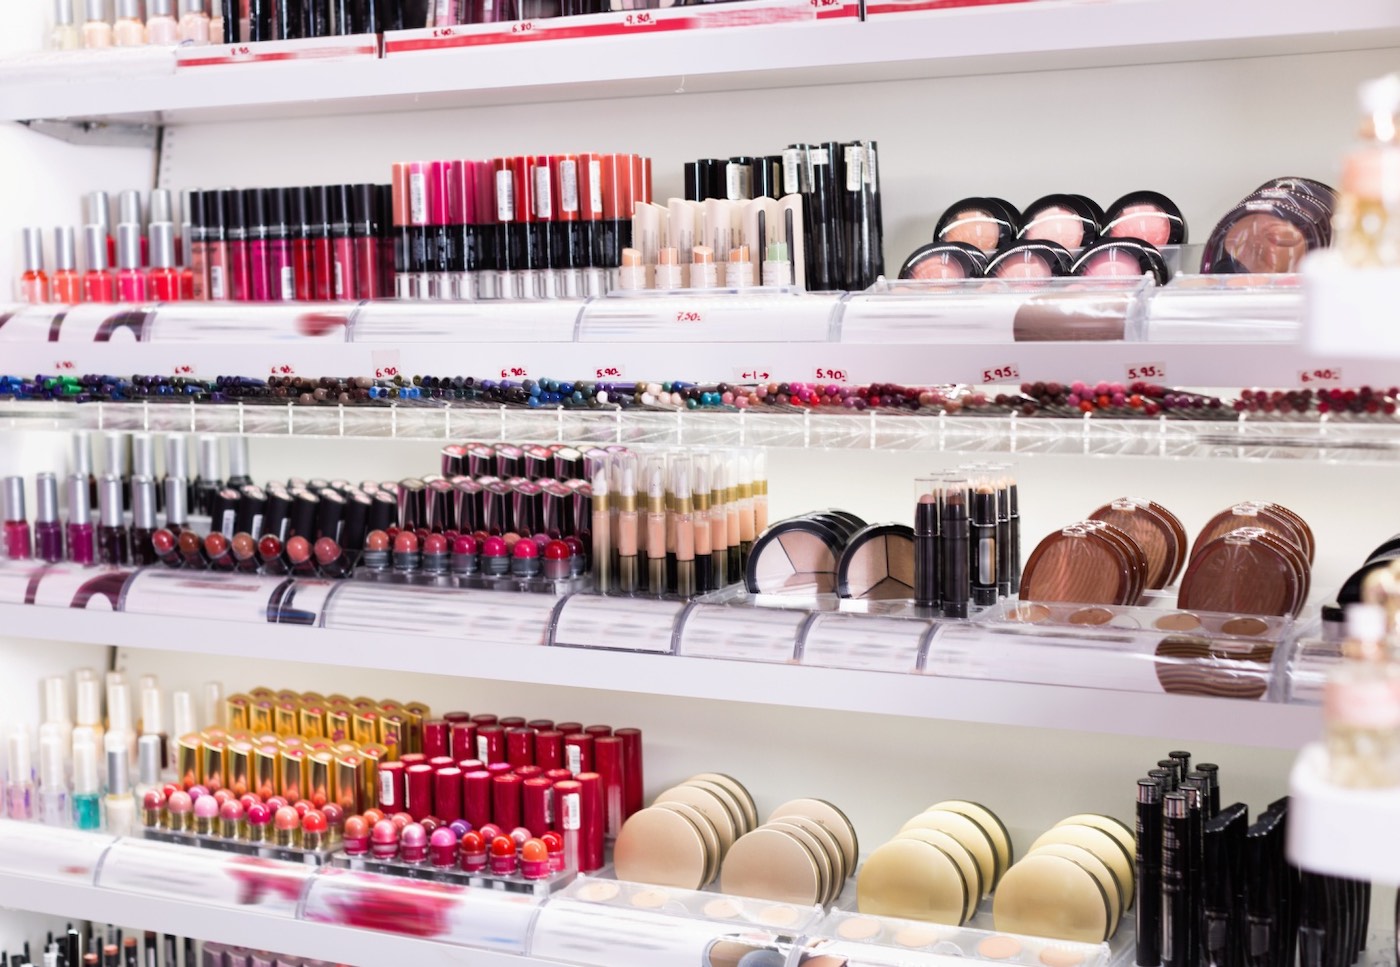 Beauty products and its marketing